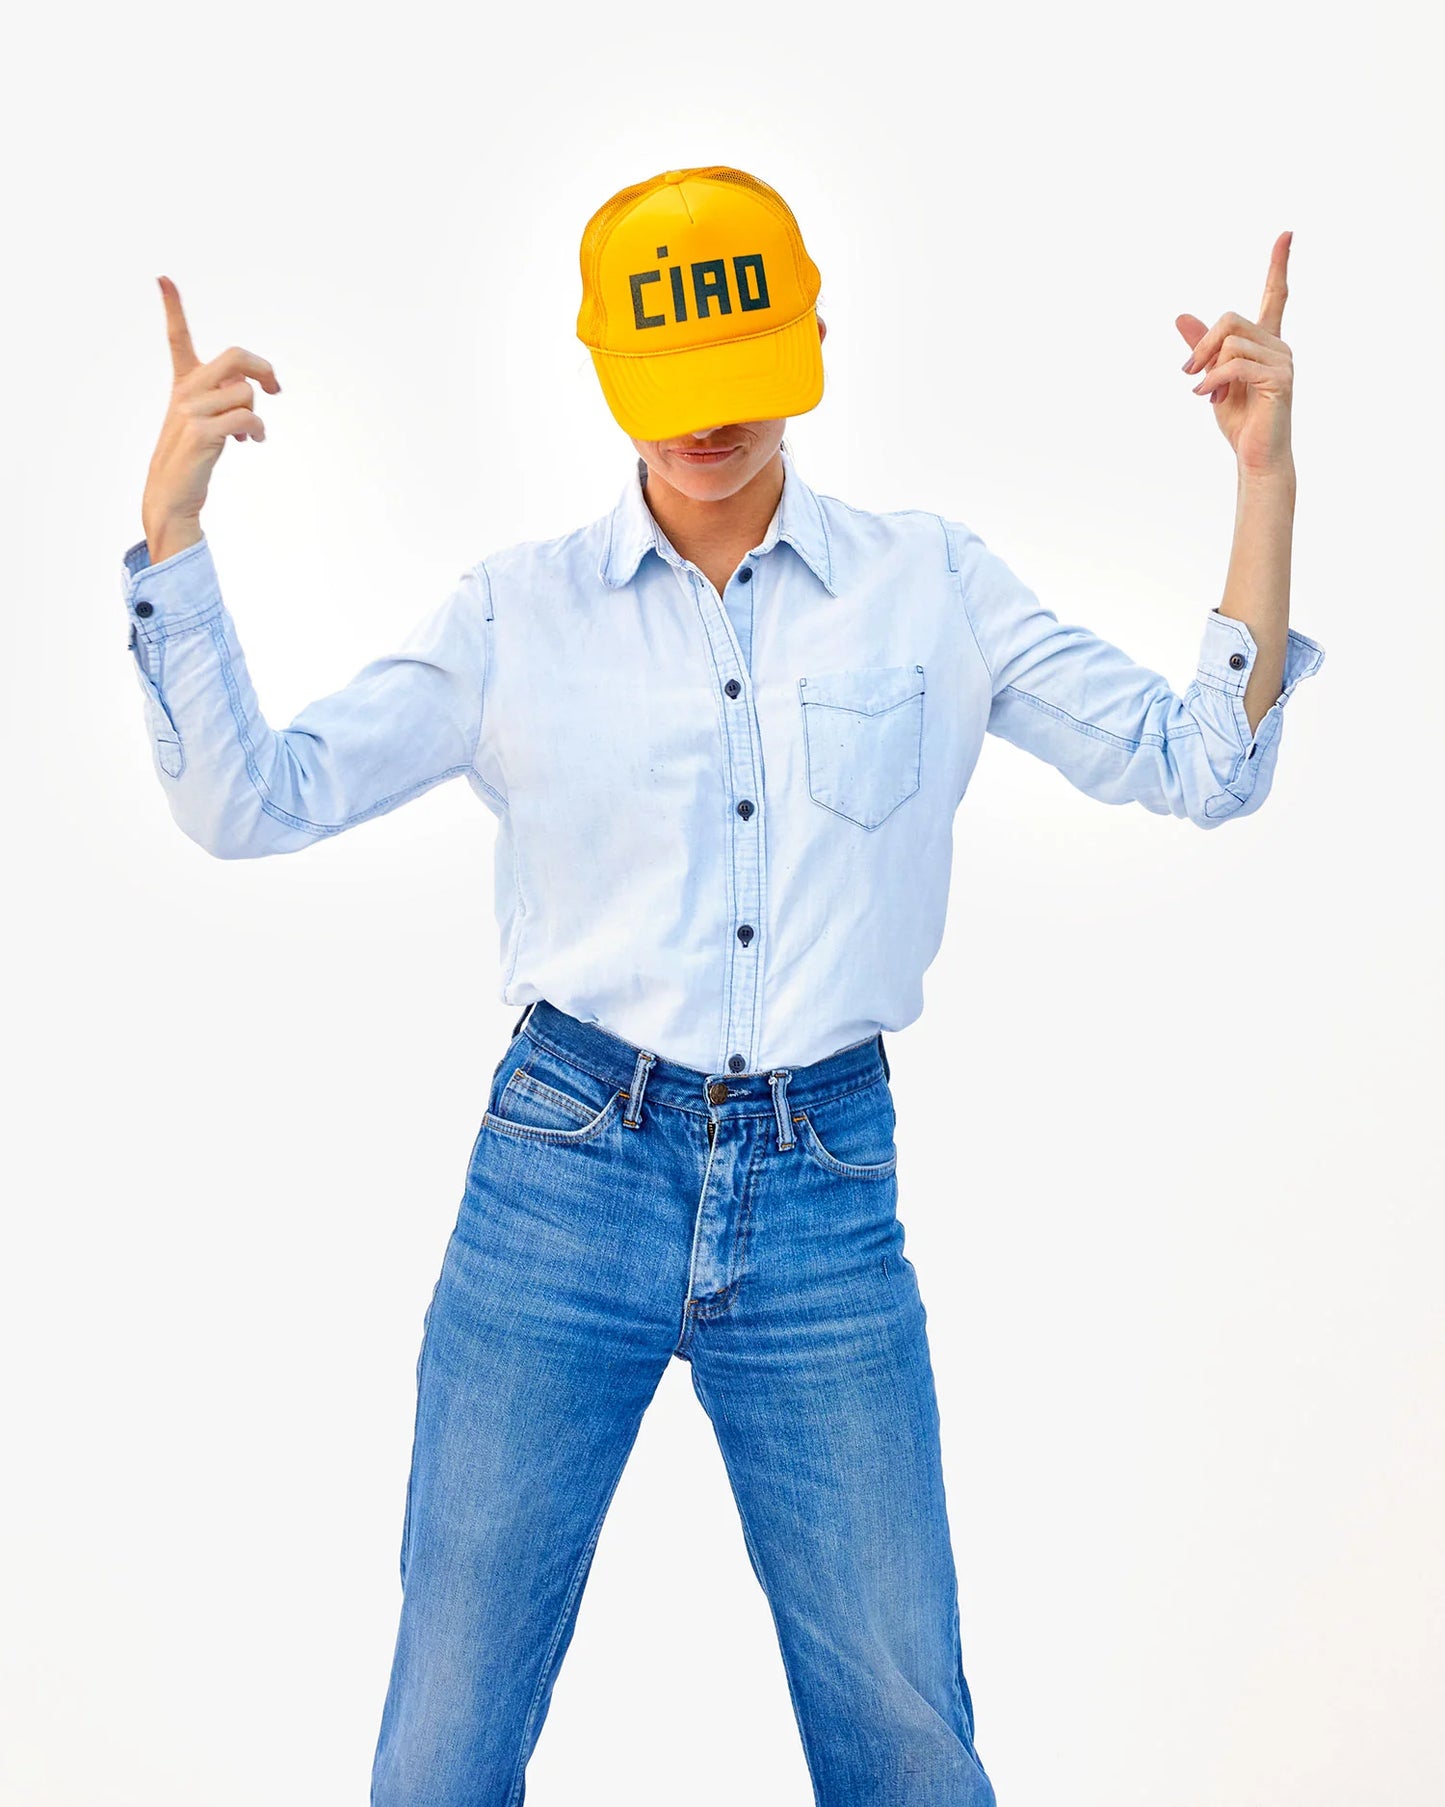 Claire V Trucker Hat Block Ciao - Multiple Options